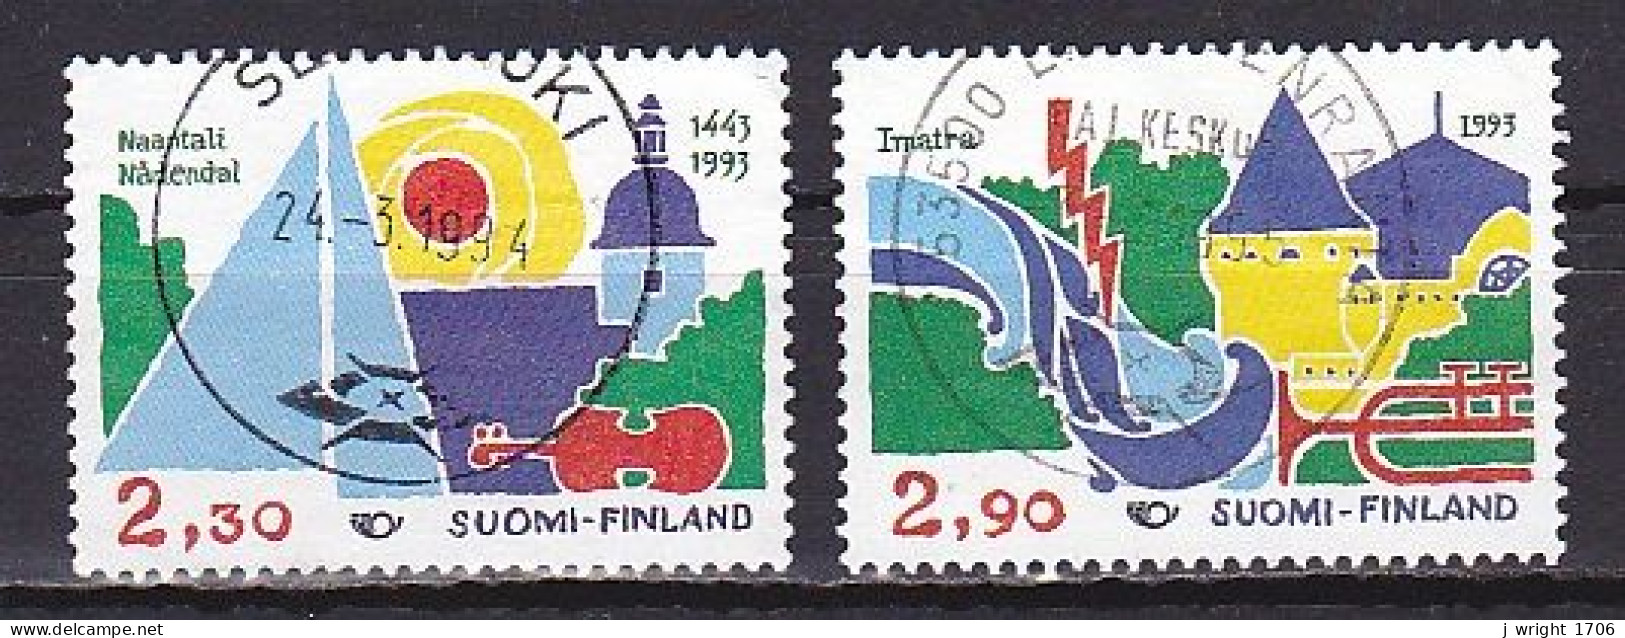 Finland, 1993, Nordic Co-operation, Set, USED - Used Stamps